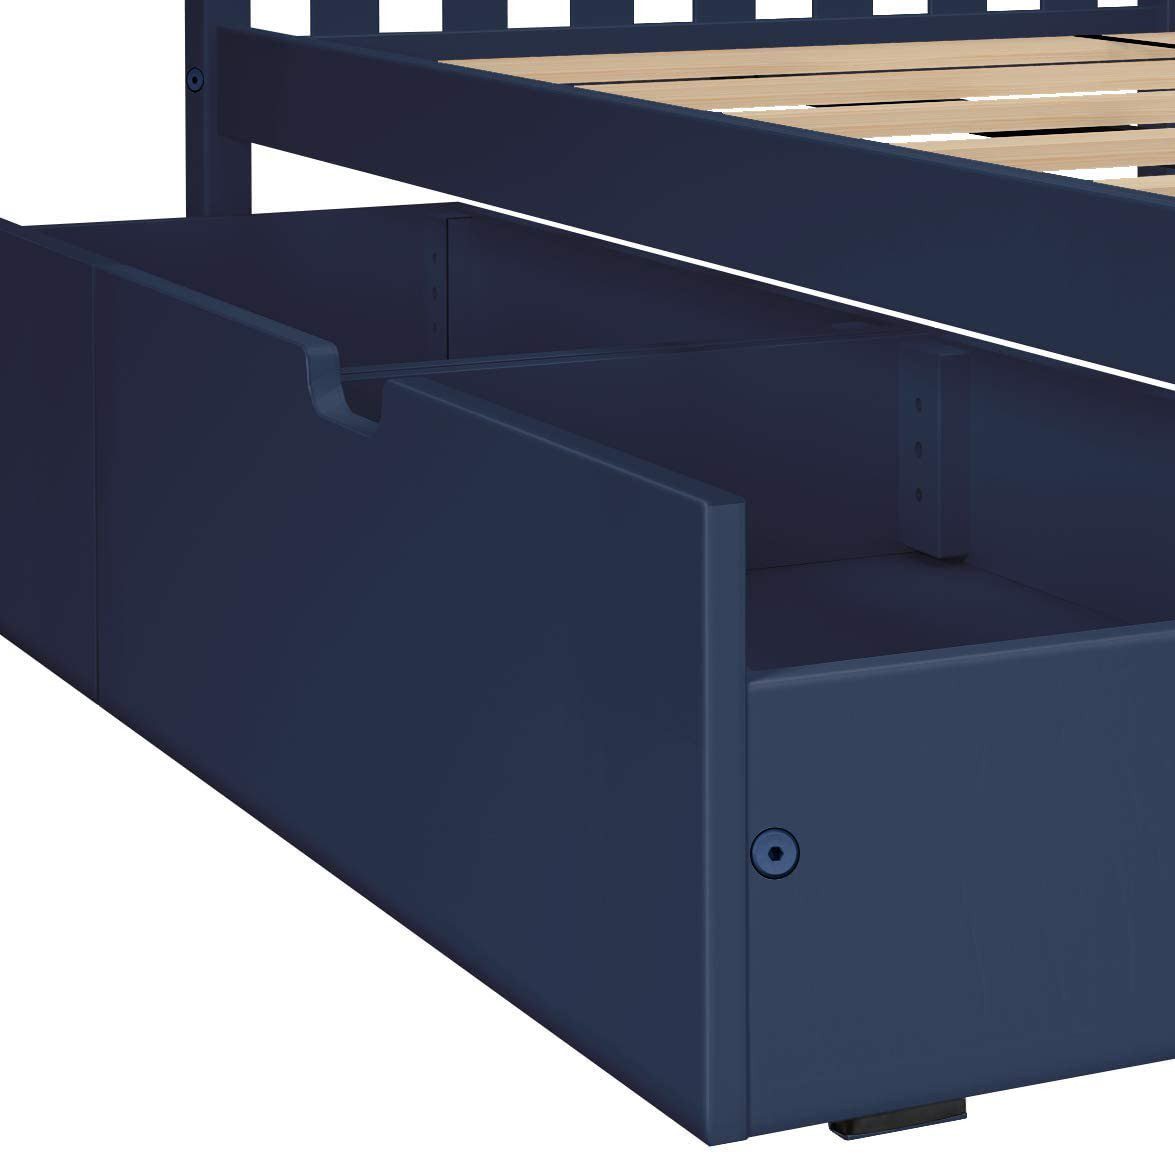 MAX & LILY SOLID WOOD TWIN OVER FULL BUNK BED IN BLUE WITH STORAGE